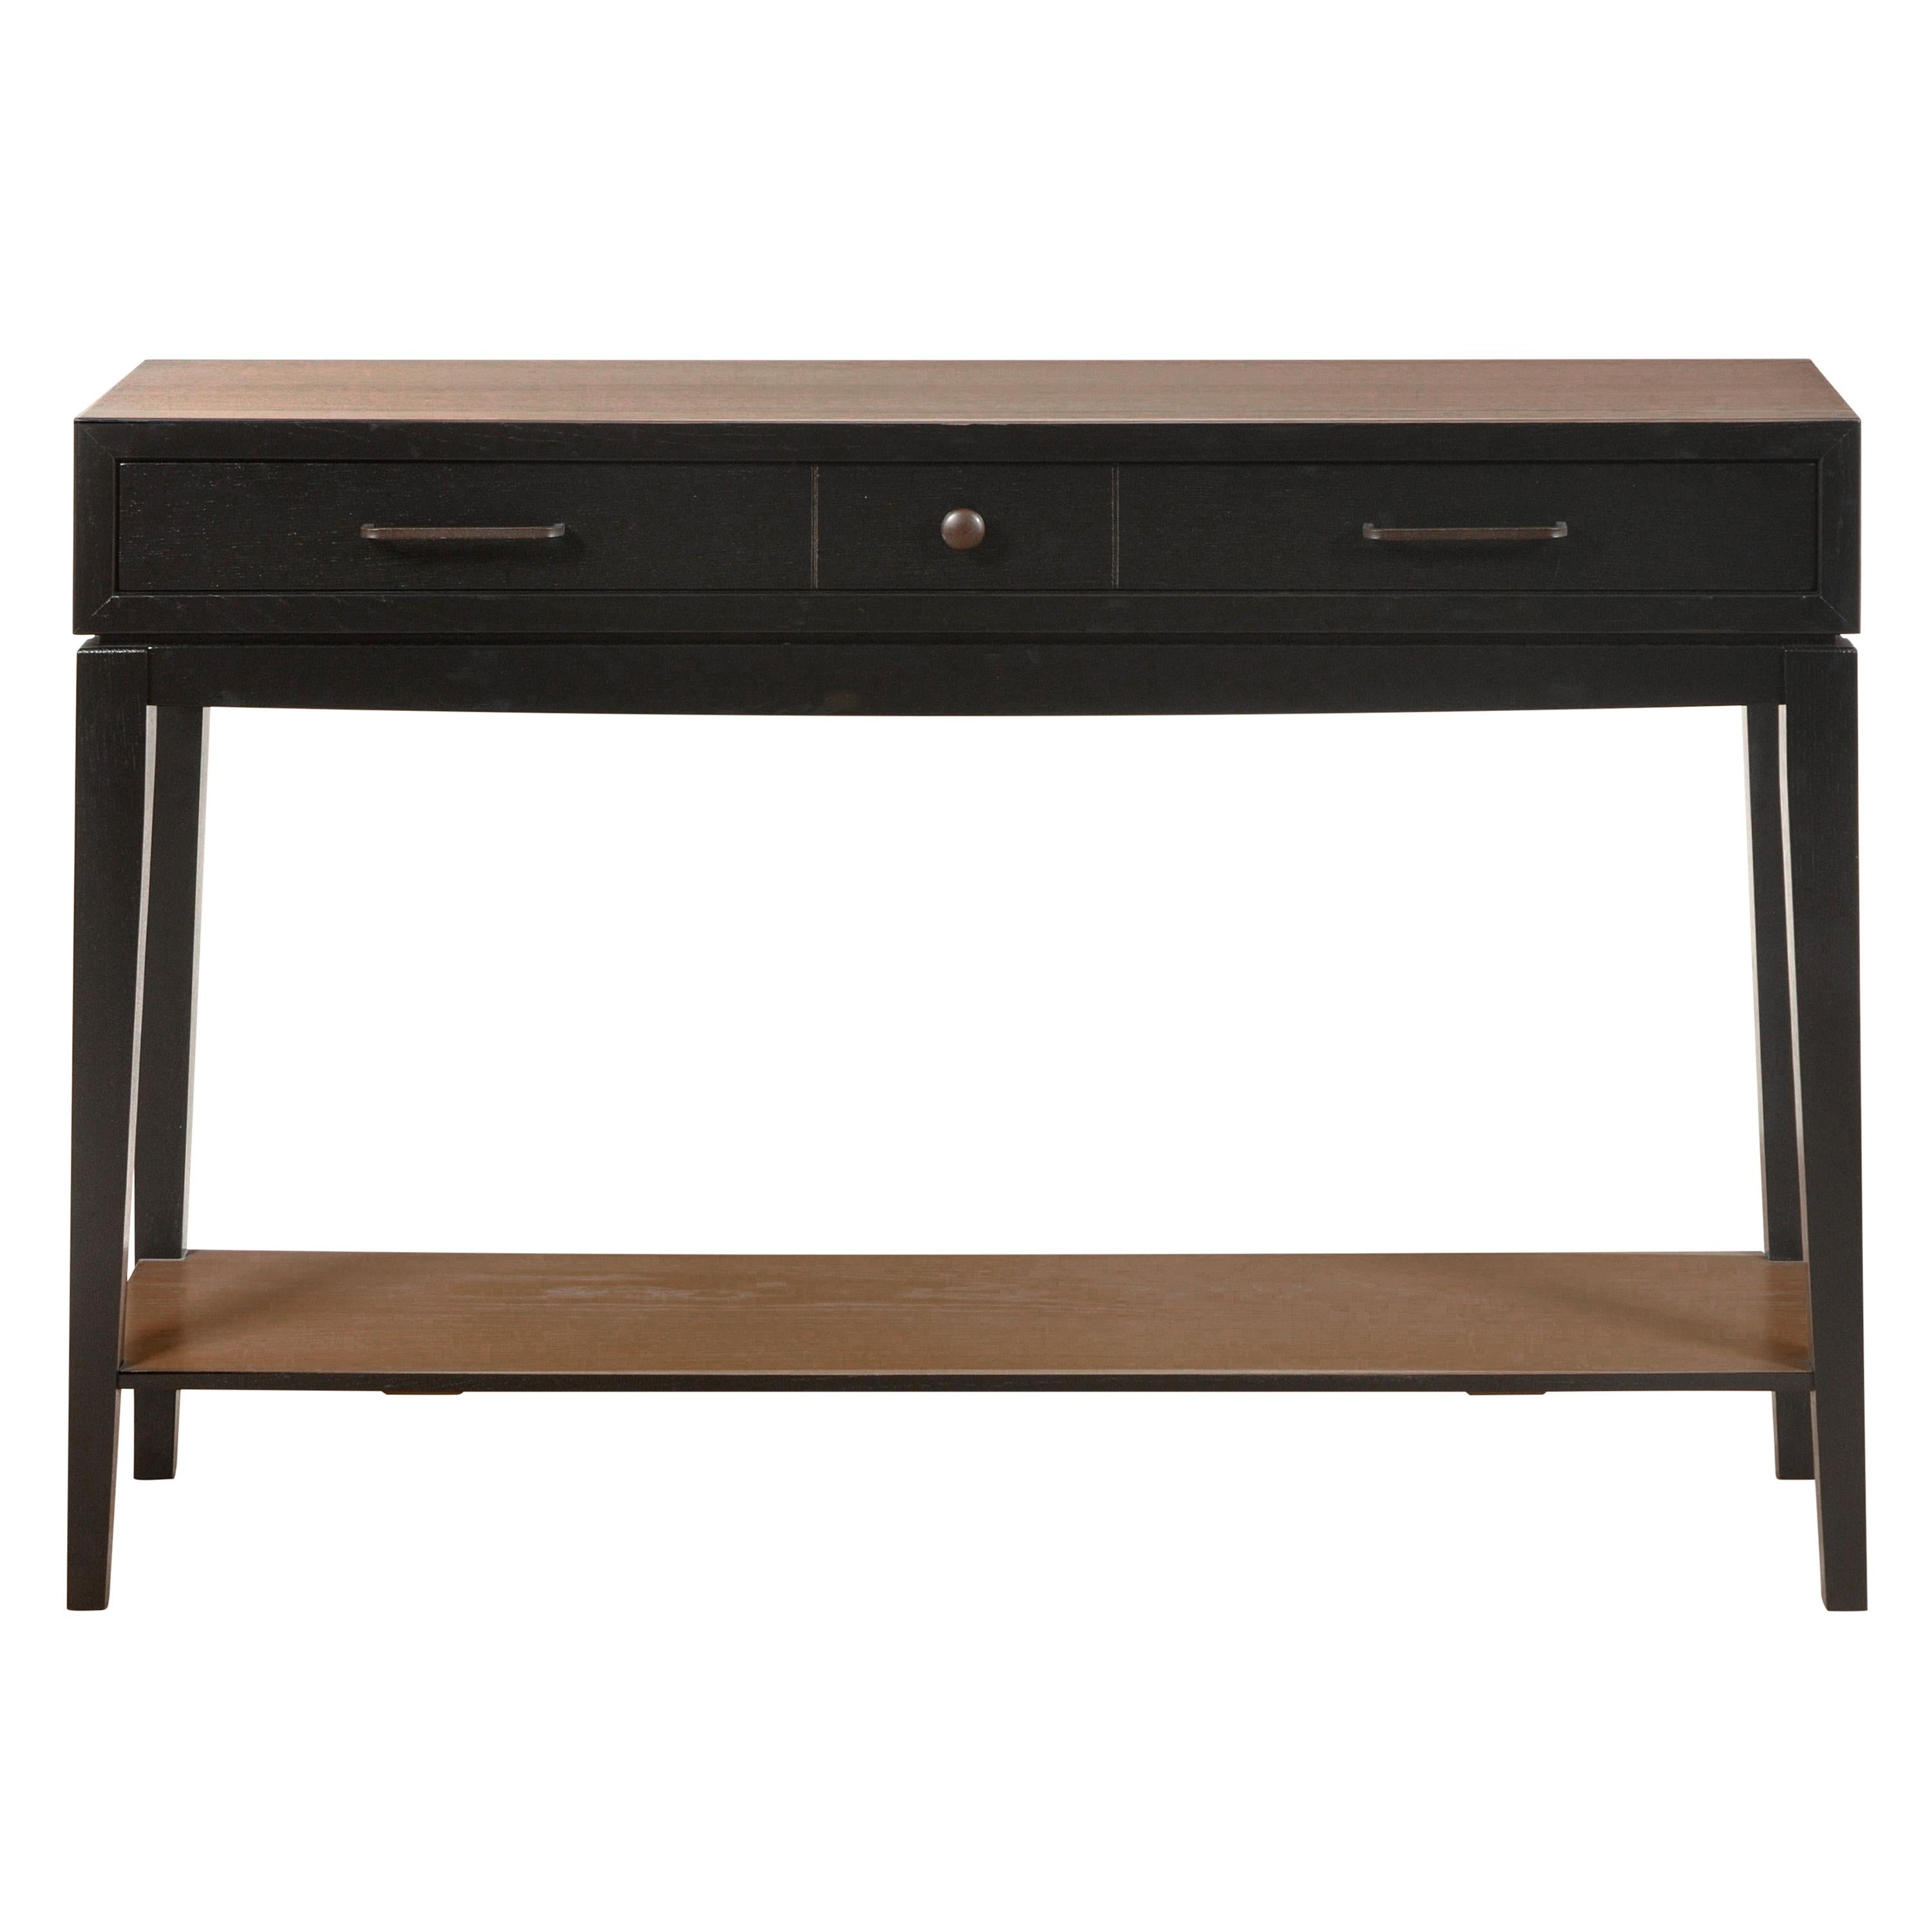 Contemporary Black Console Table in French Oak with One Shelf